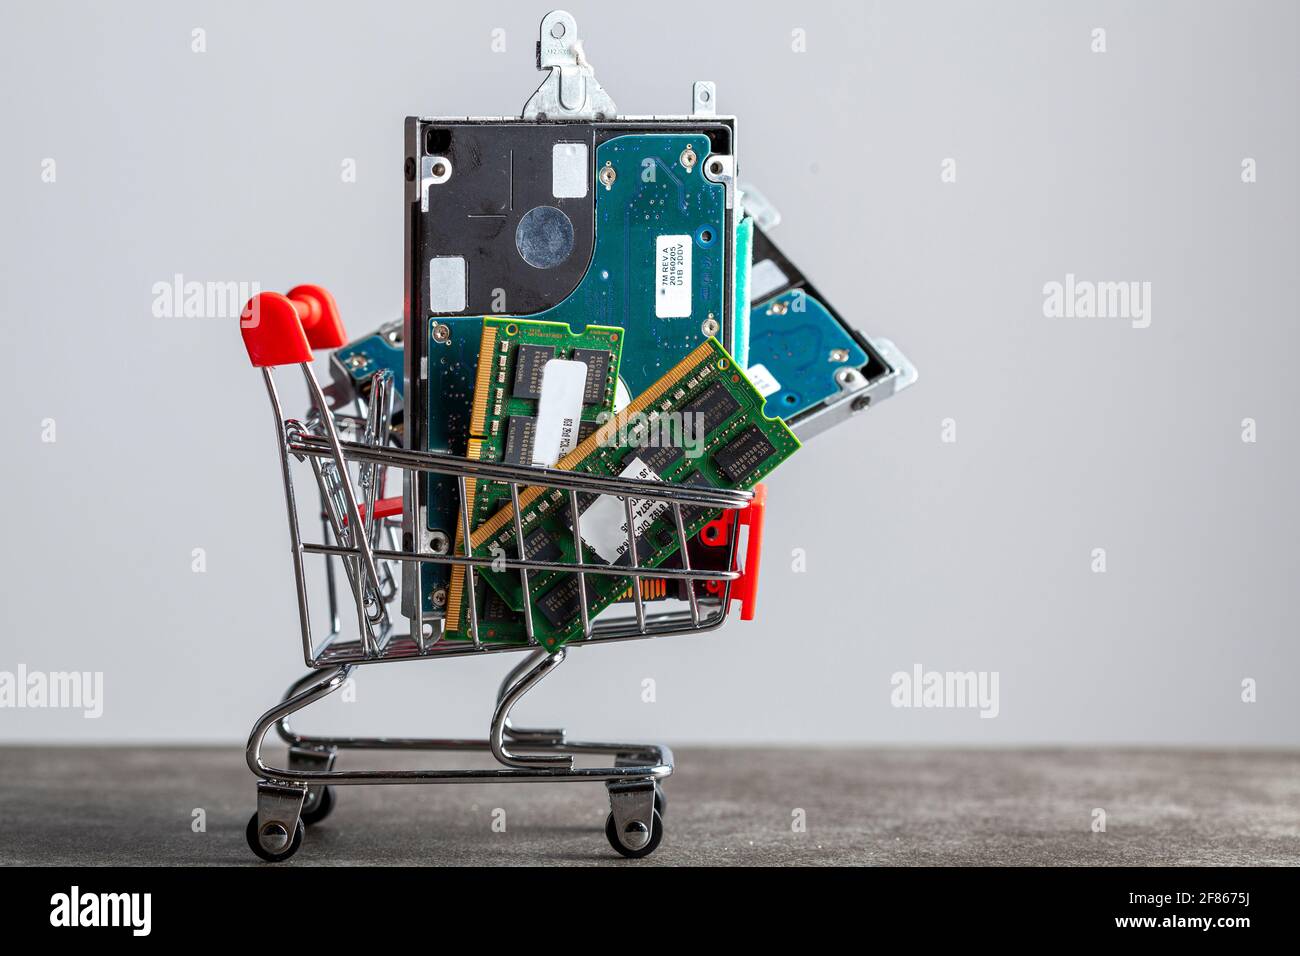 A concept image with a small shopping cart filled with computer parts including RAM memory cards and a hard drive. Shopping for technology, consumer e Stock Photo